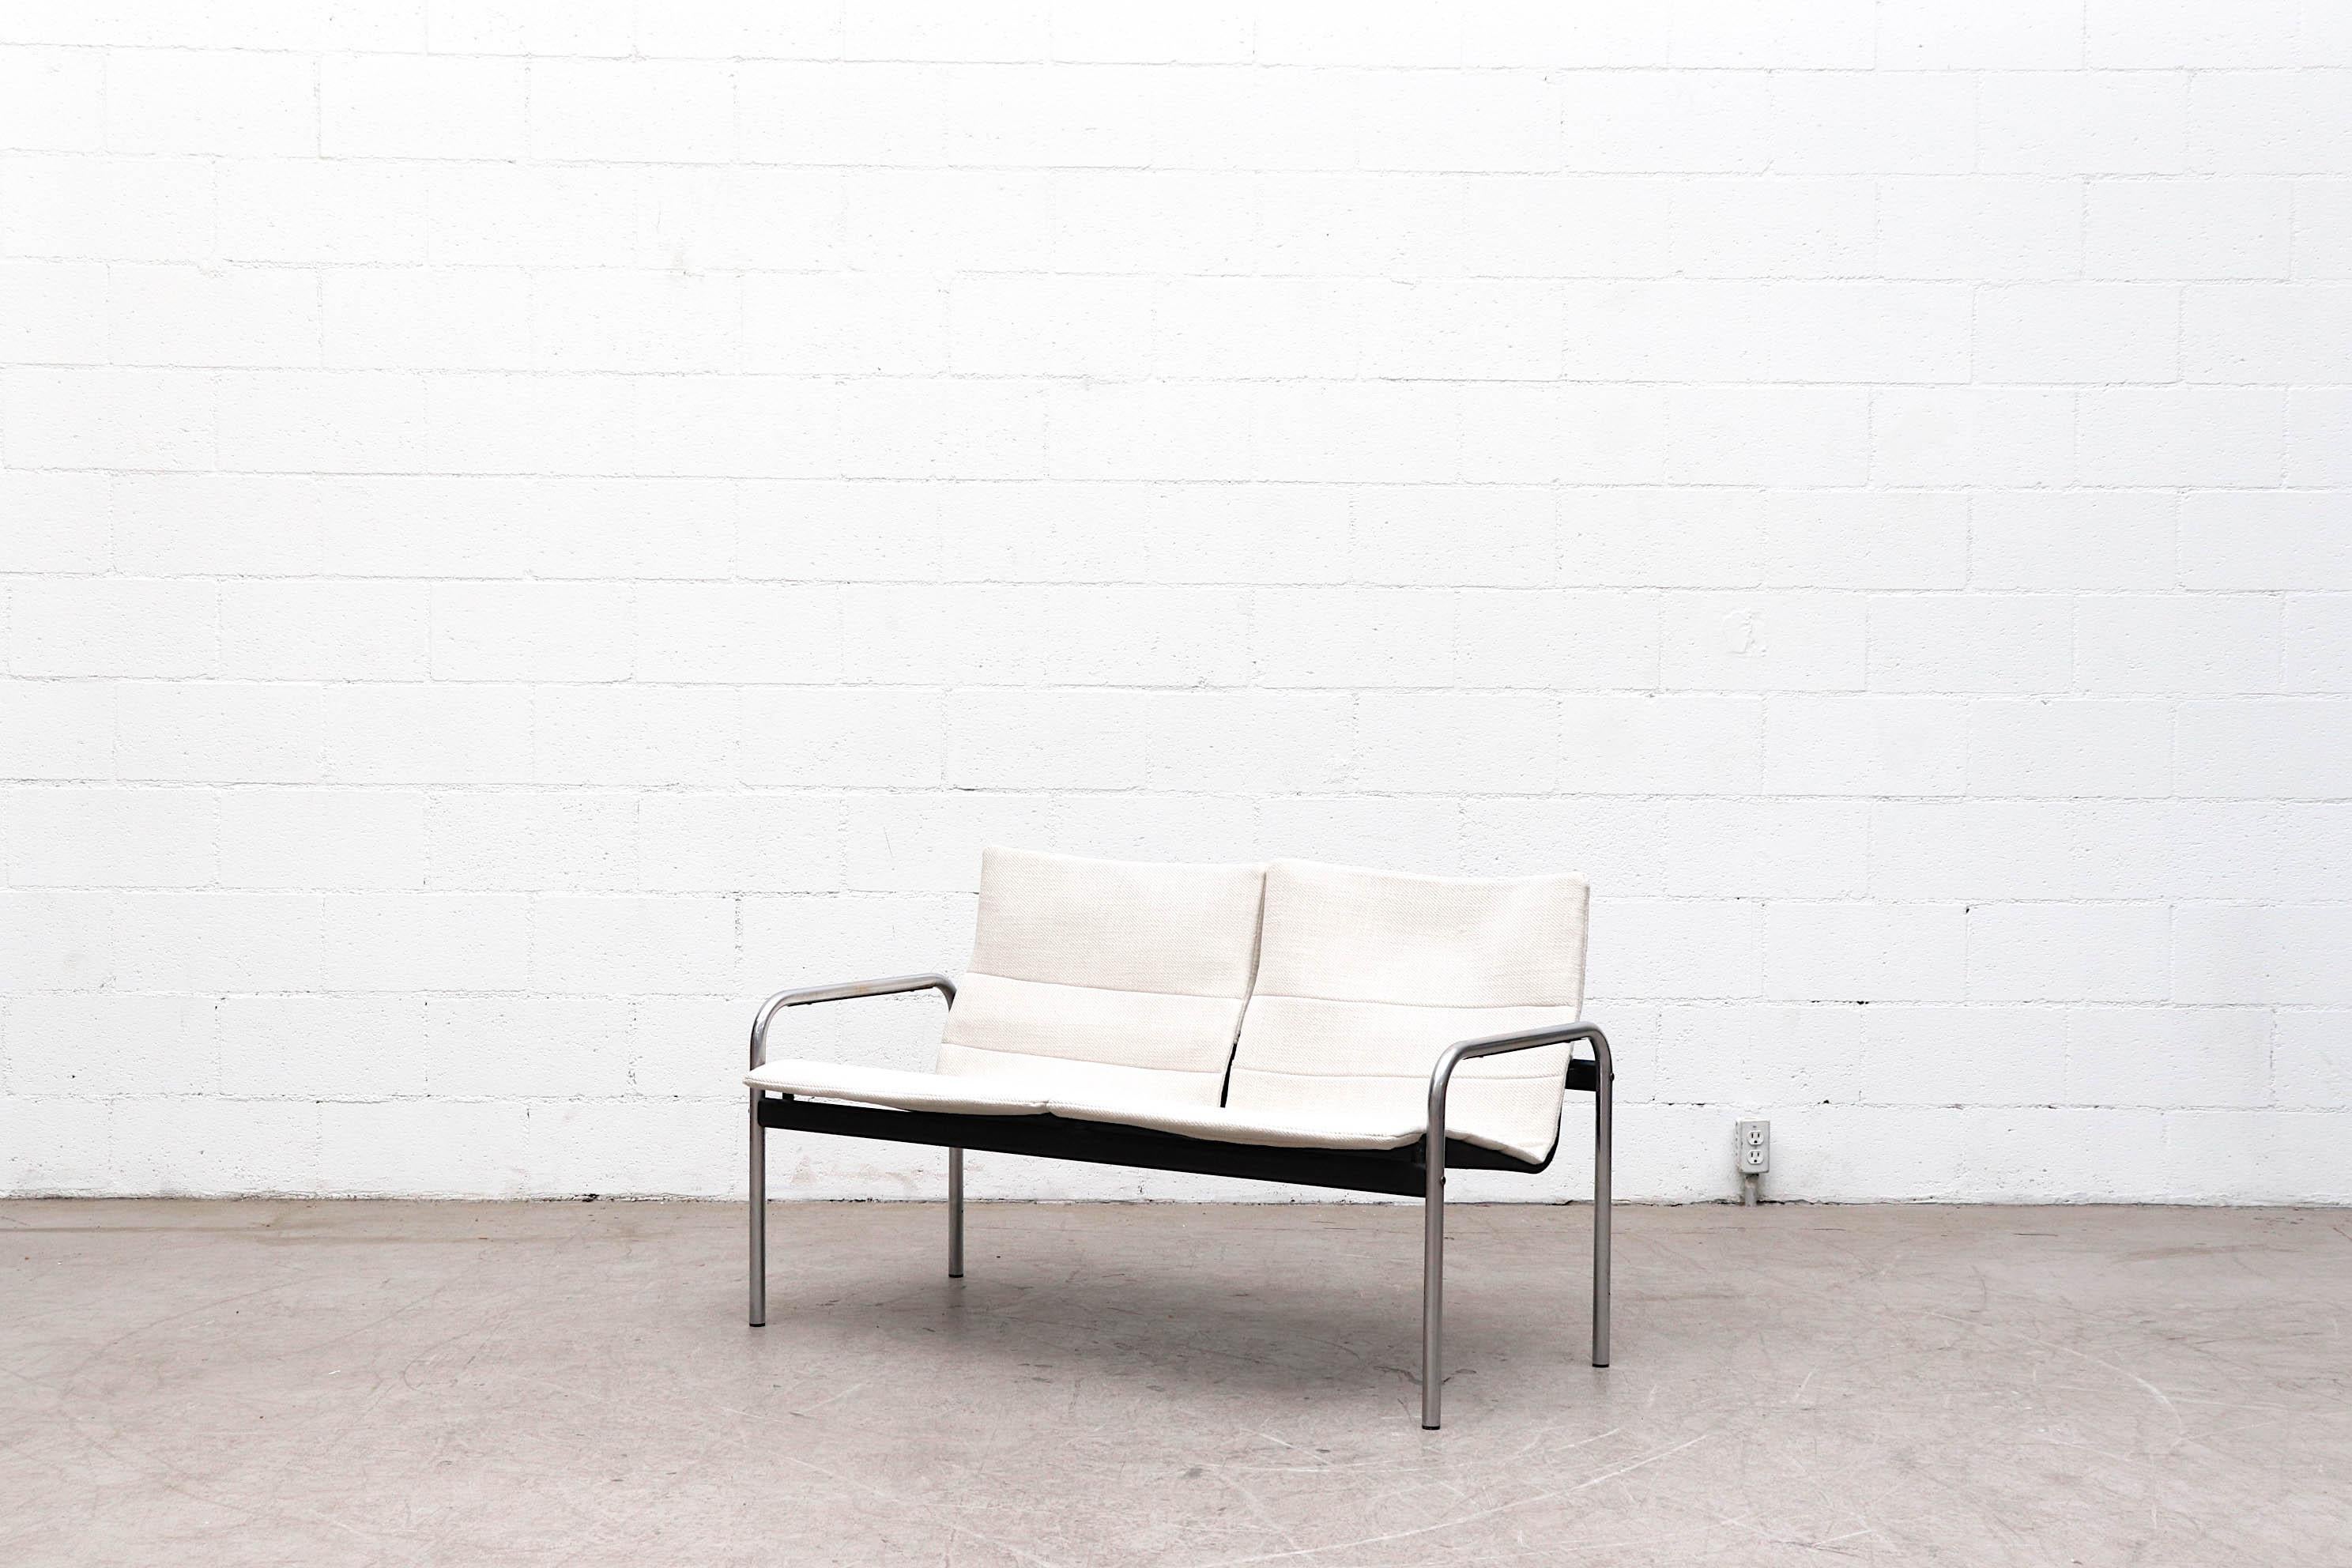 Ultrex series 2-seat loveseat by Just Meyer for Kembo, 1970s. Tubular chrome frame, canvas support and cornflower seat covers. Lowest sitting height is 13.5